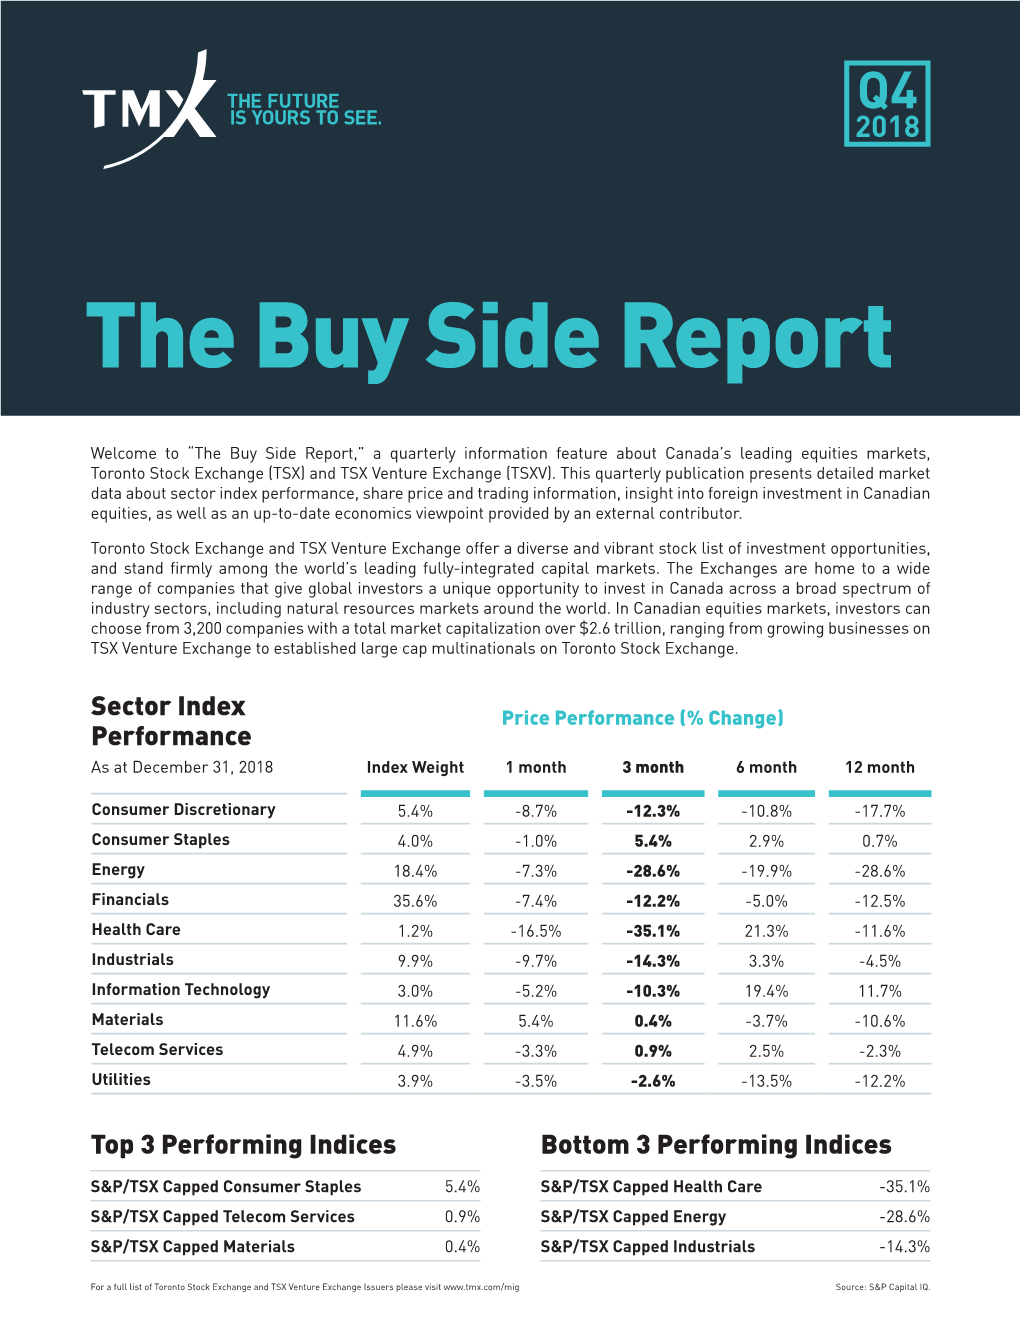 The Buy Side Report